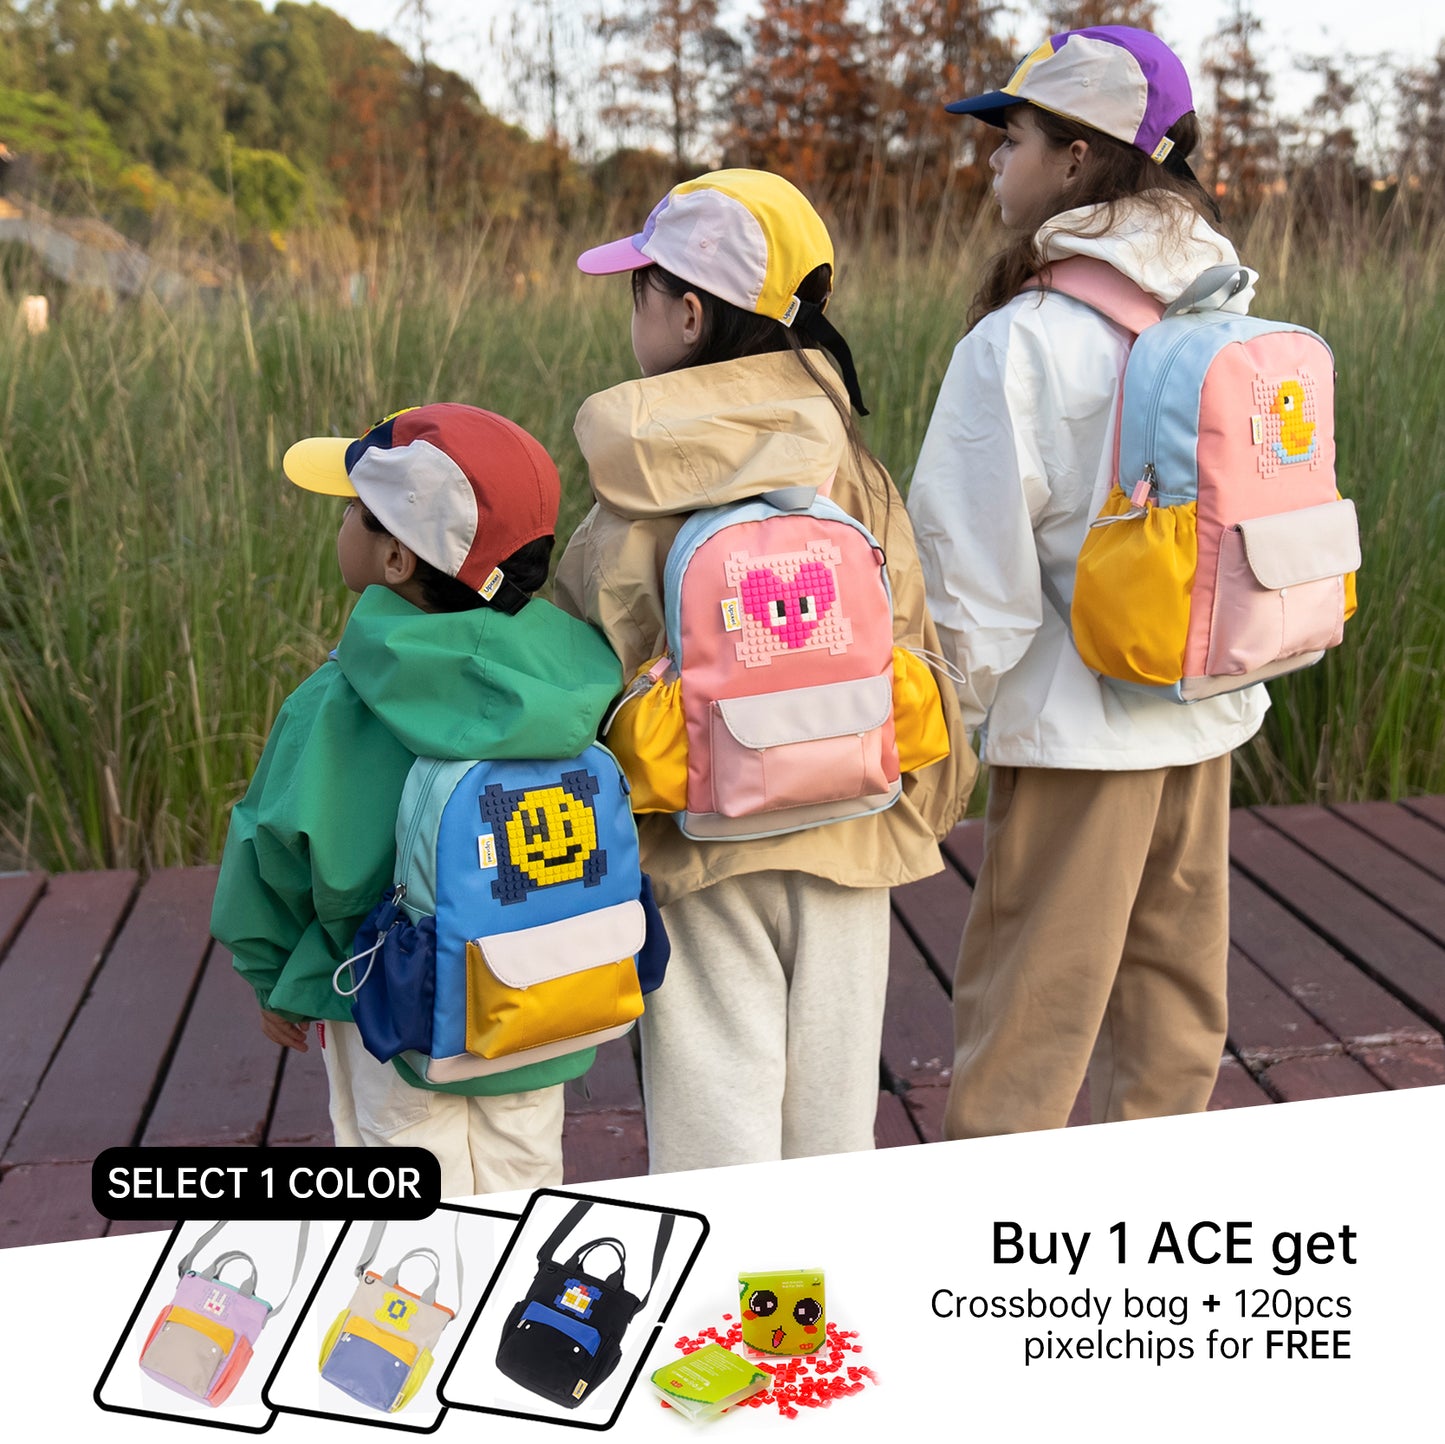 UPIXEL Kids Backpack DIY Patterns Lightweight Outdoor Daypack for Boys and Girls Age 3-8